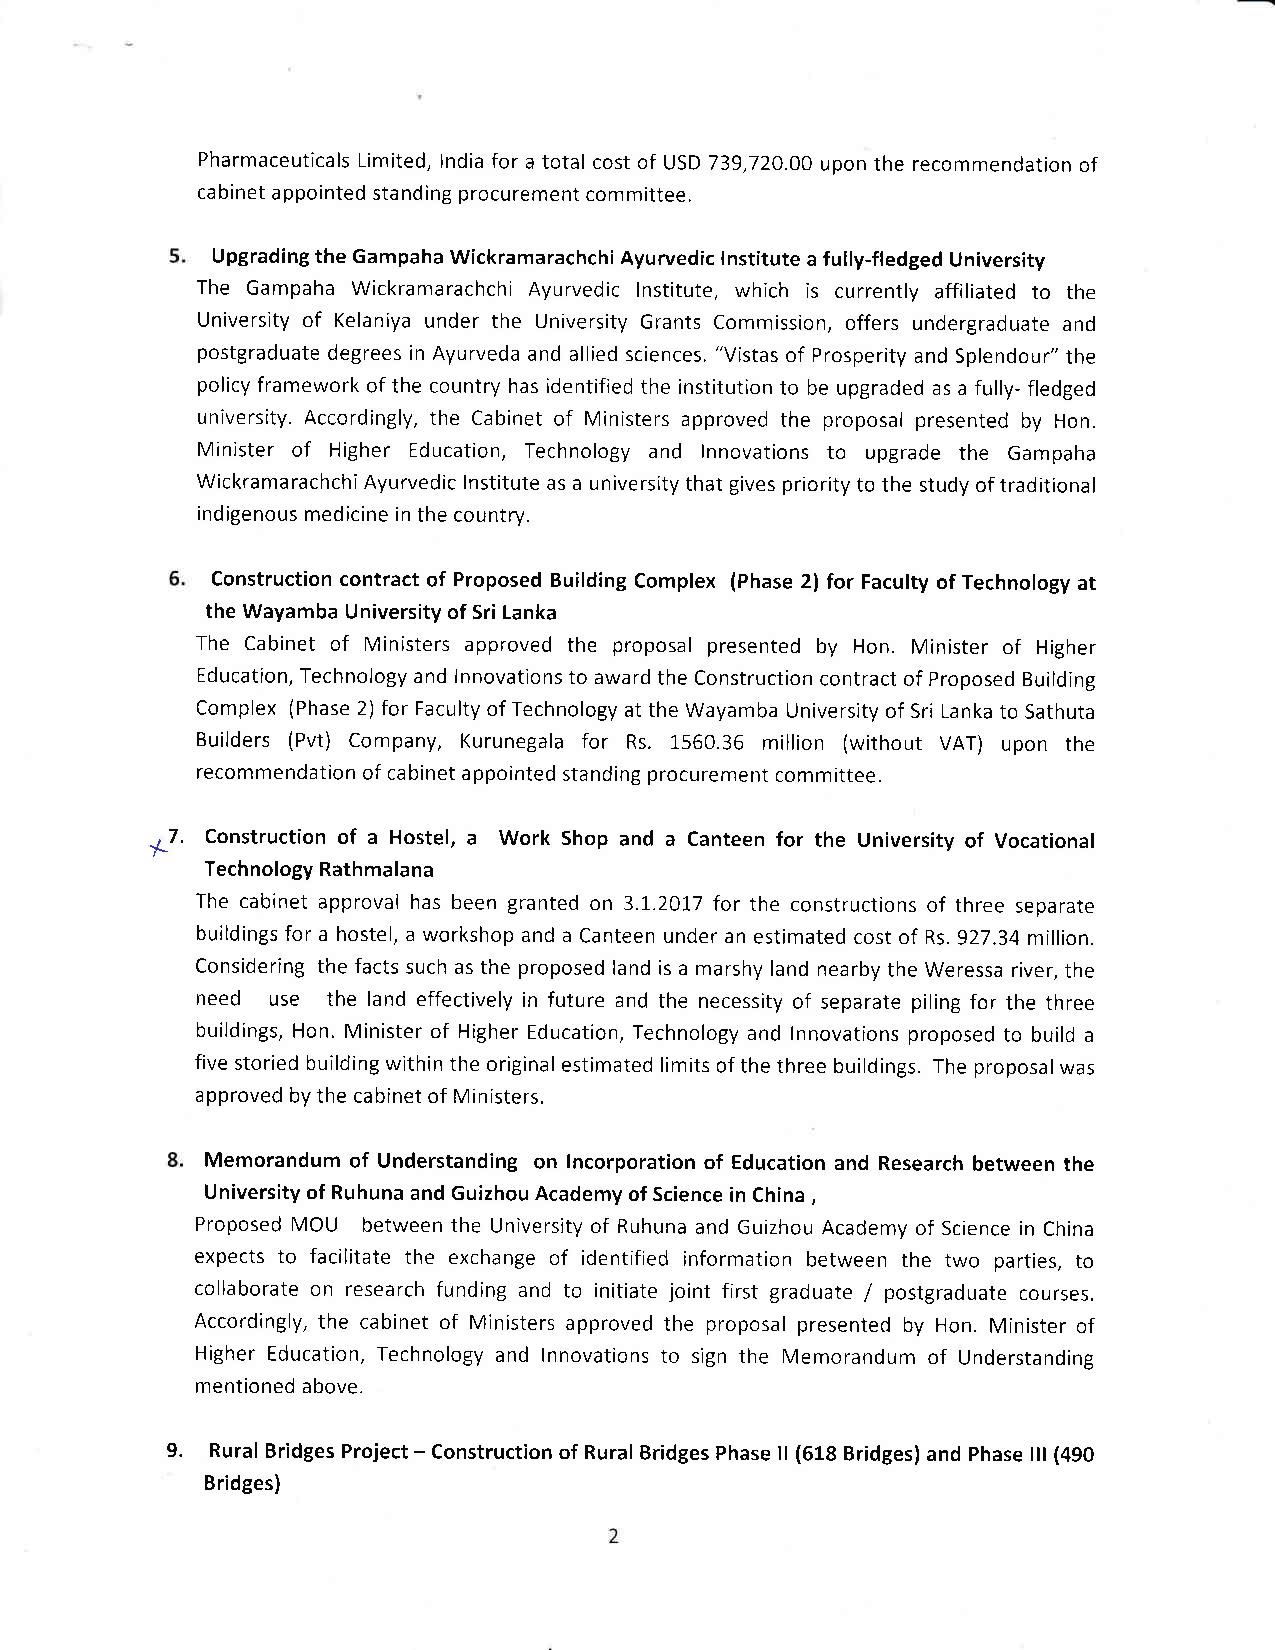 Cabinet Decision on 08.07.2020 E page 002